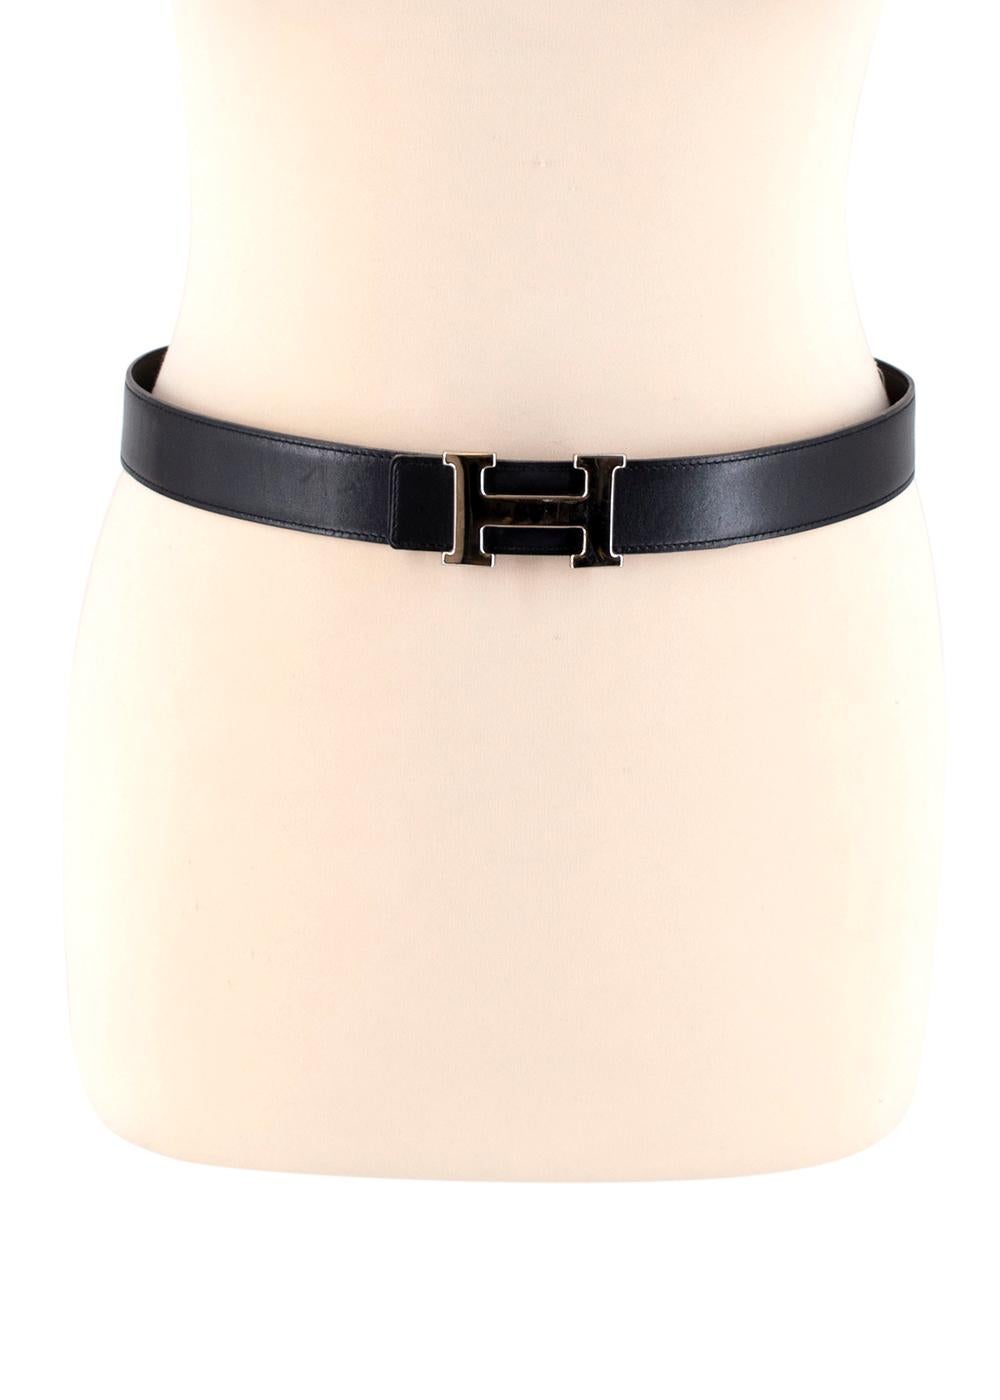 Hermes Silver H Buckle Black Leather 32mm Belt

-Age [A] - 1997
-Soft, smooth swift leather
-Iconic silver tone H logo buckle
-Adjustable fit
-Hermes branding on inside
-Waist belt

Materials: swift leather

Made in France

(Seam to Seam):
90cm x